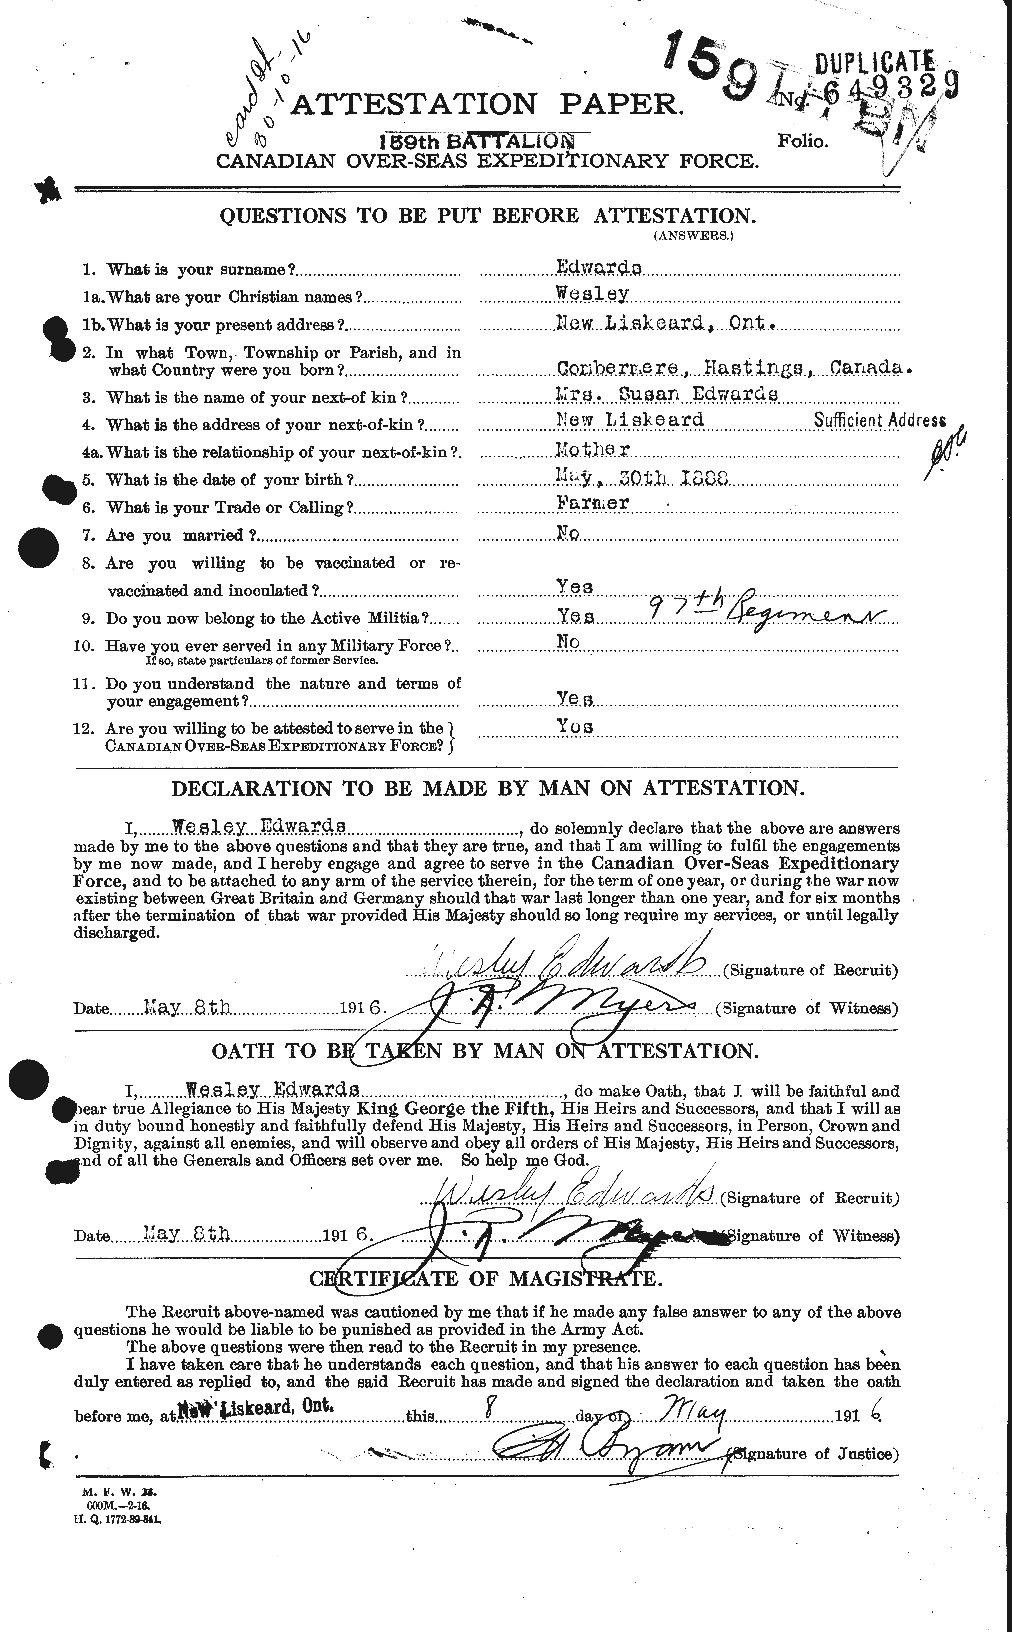 Personnel Records of the First World War - CEF 310381a